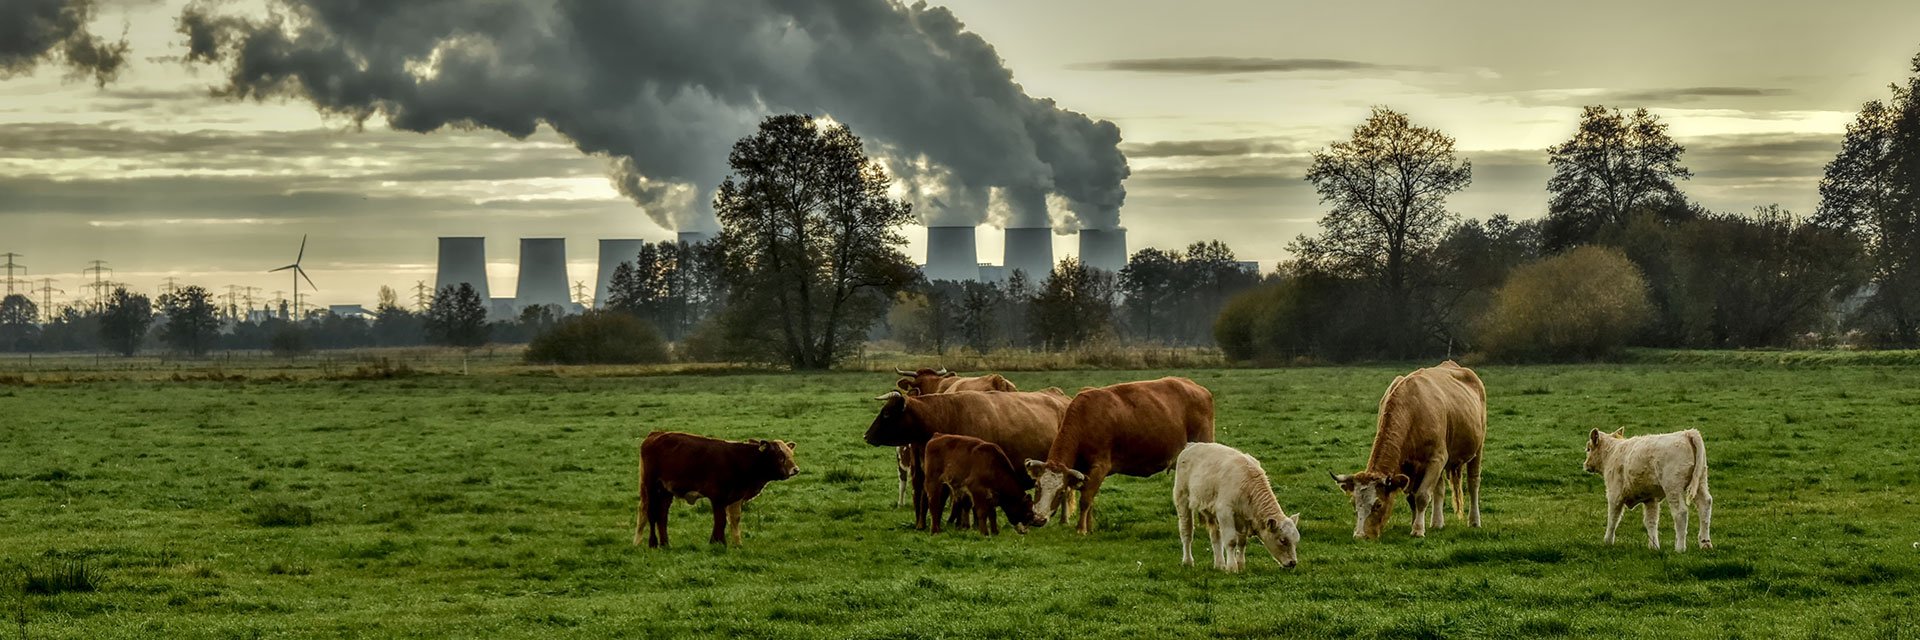 Grazing cows on a green field in front of an industrial plant.